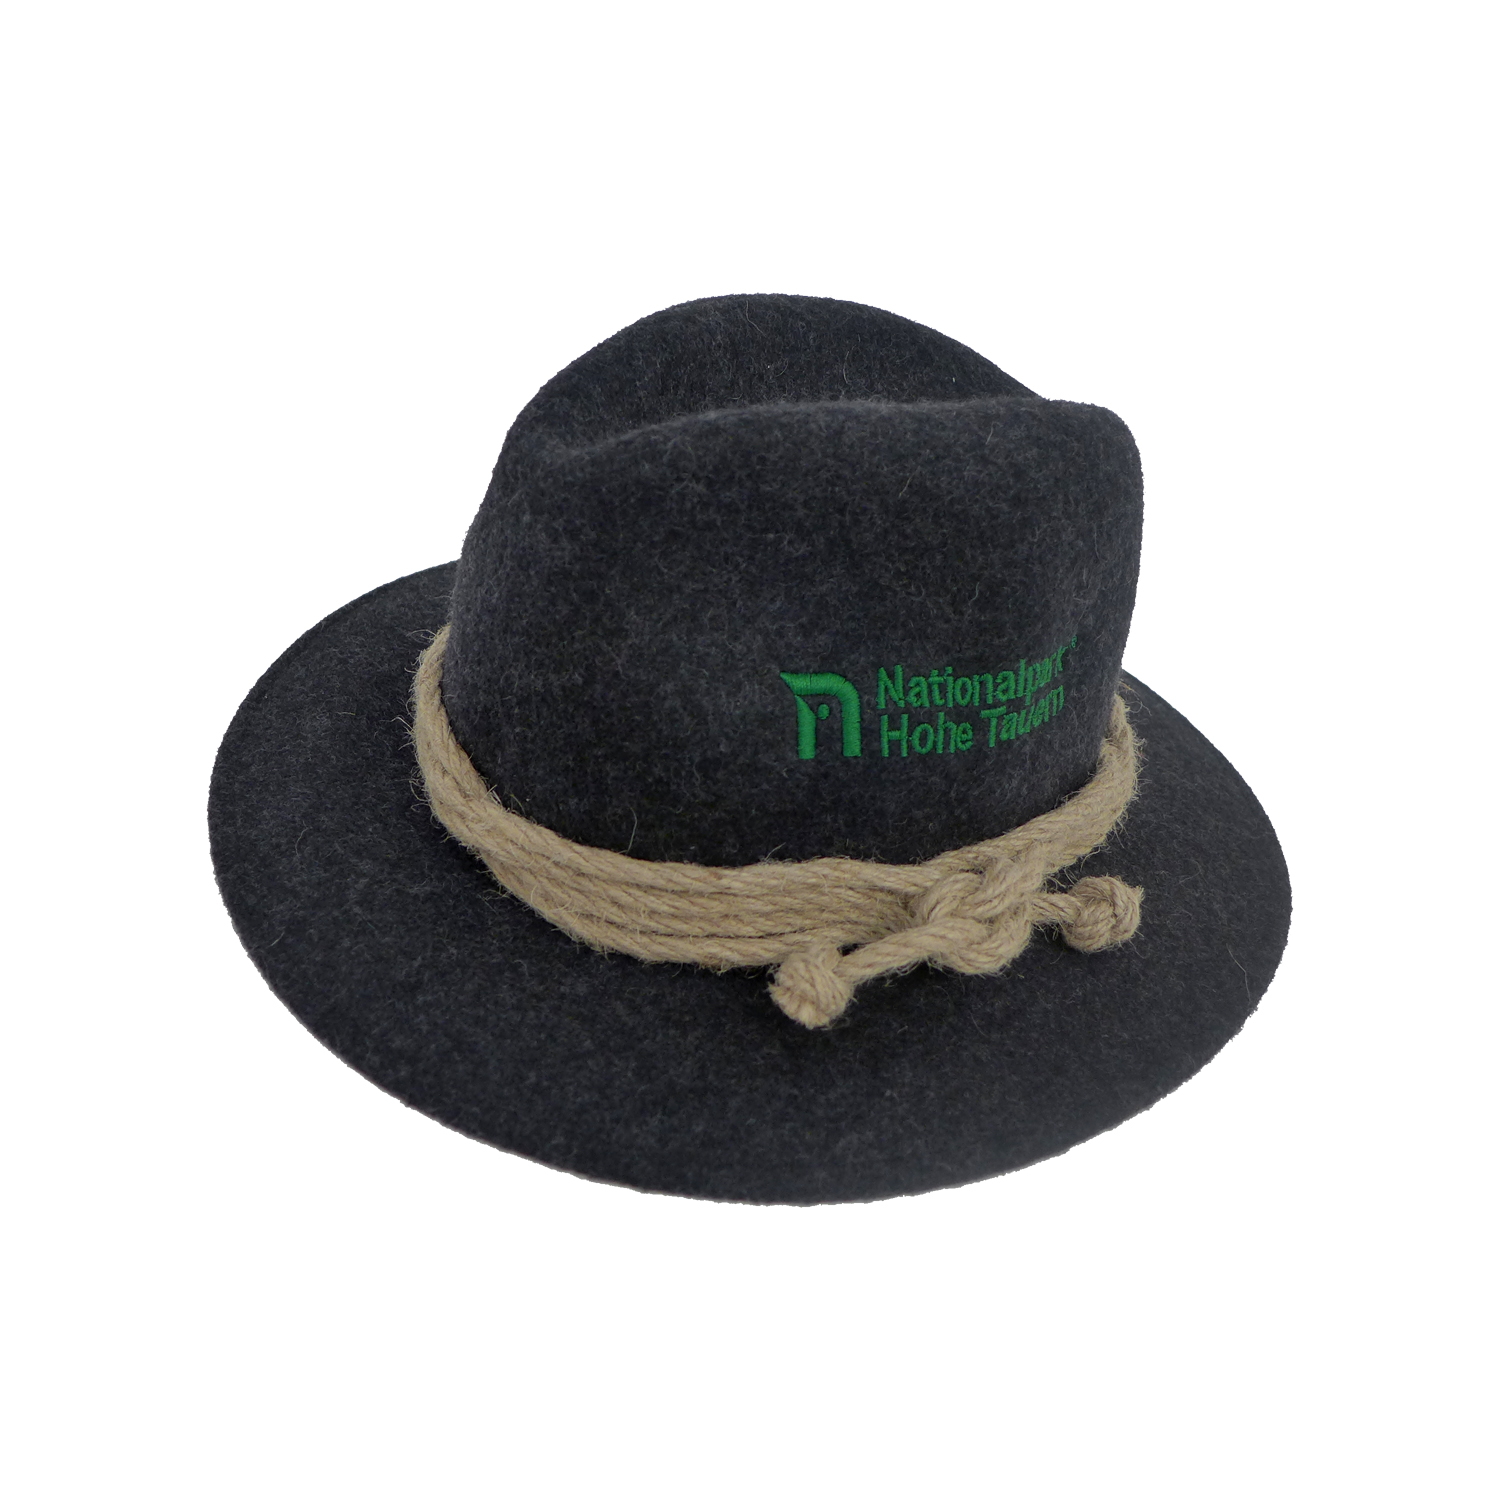 Hohe Tauern National Park rope hat